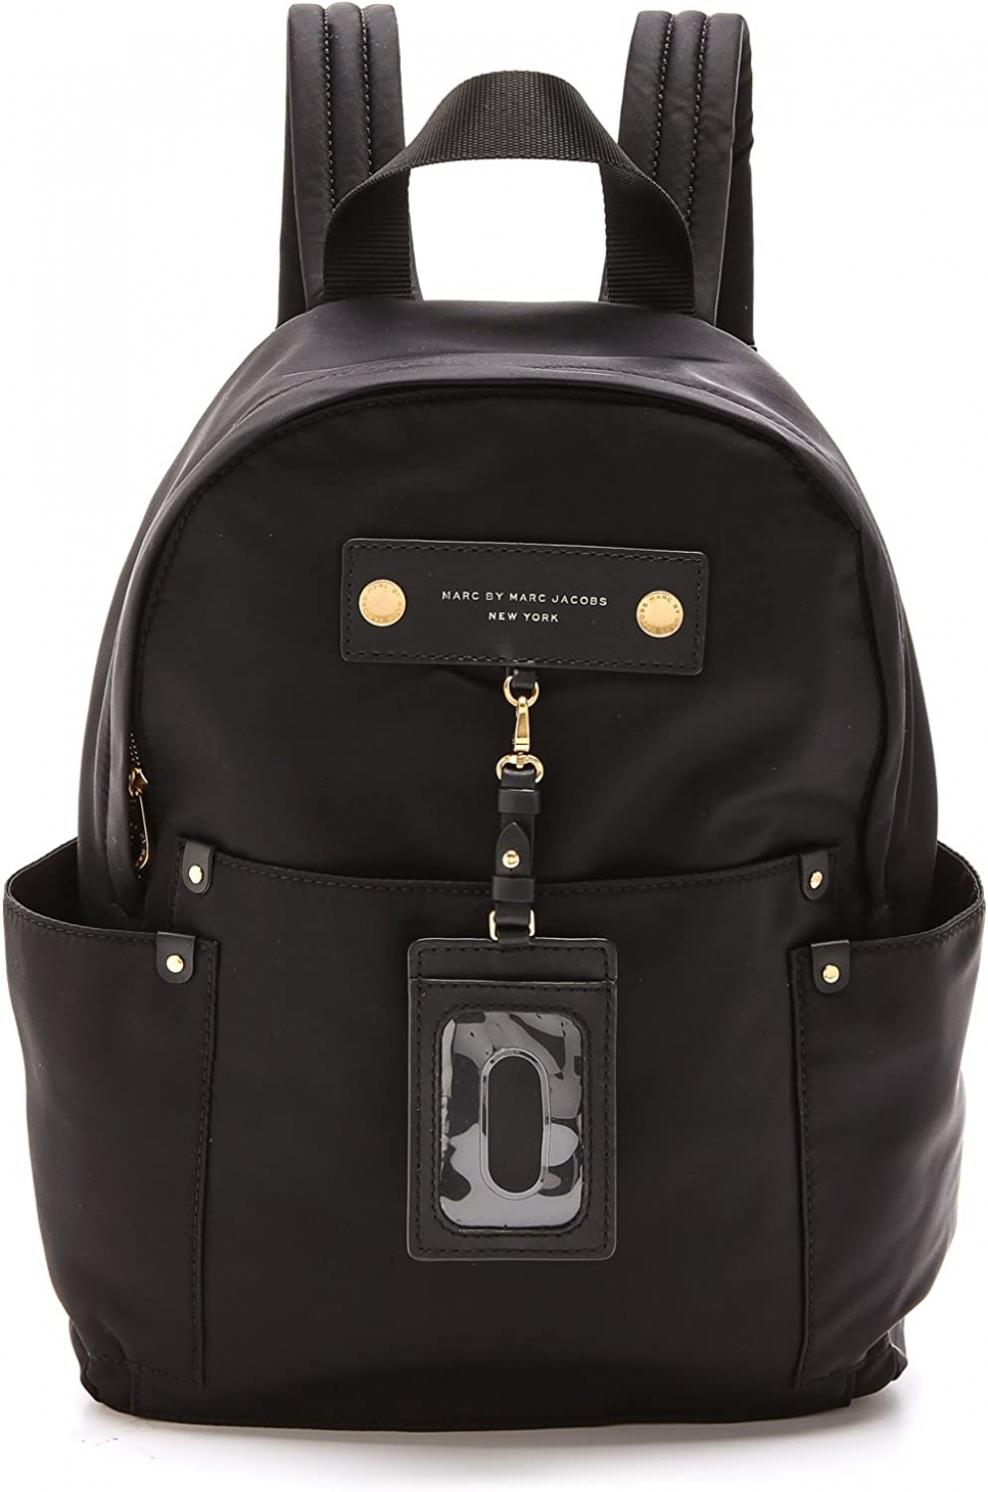 Marc by Marc Jacobs Preppy Nylon Backpack Backpack Black One Size